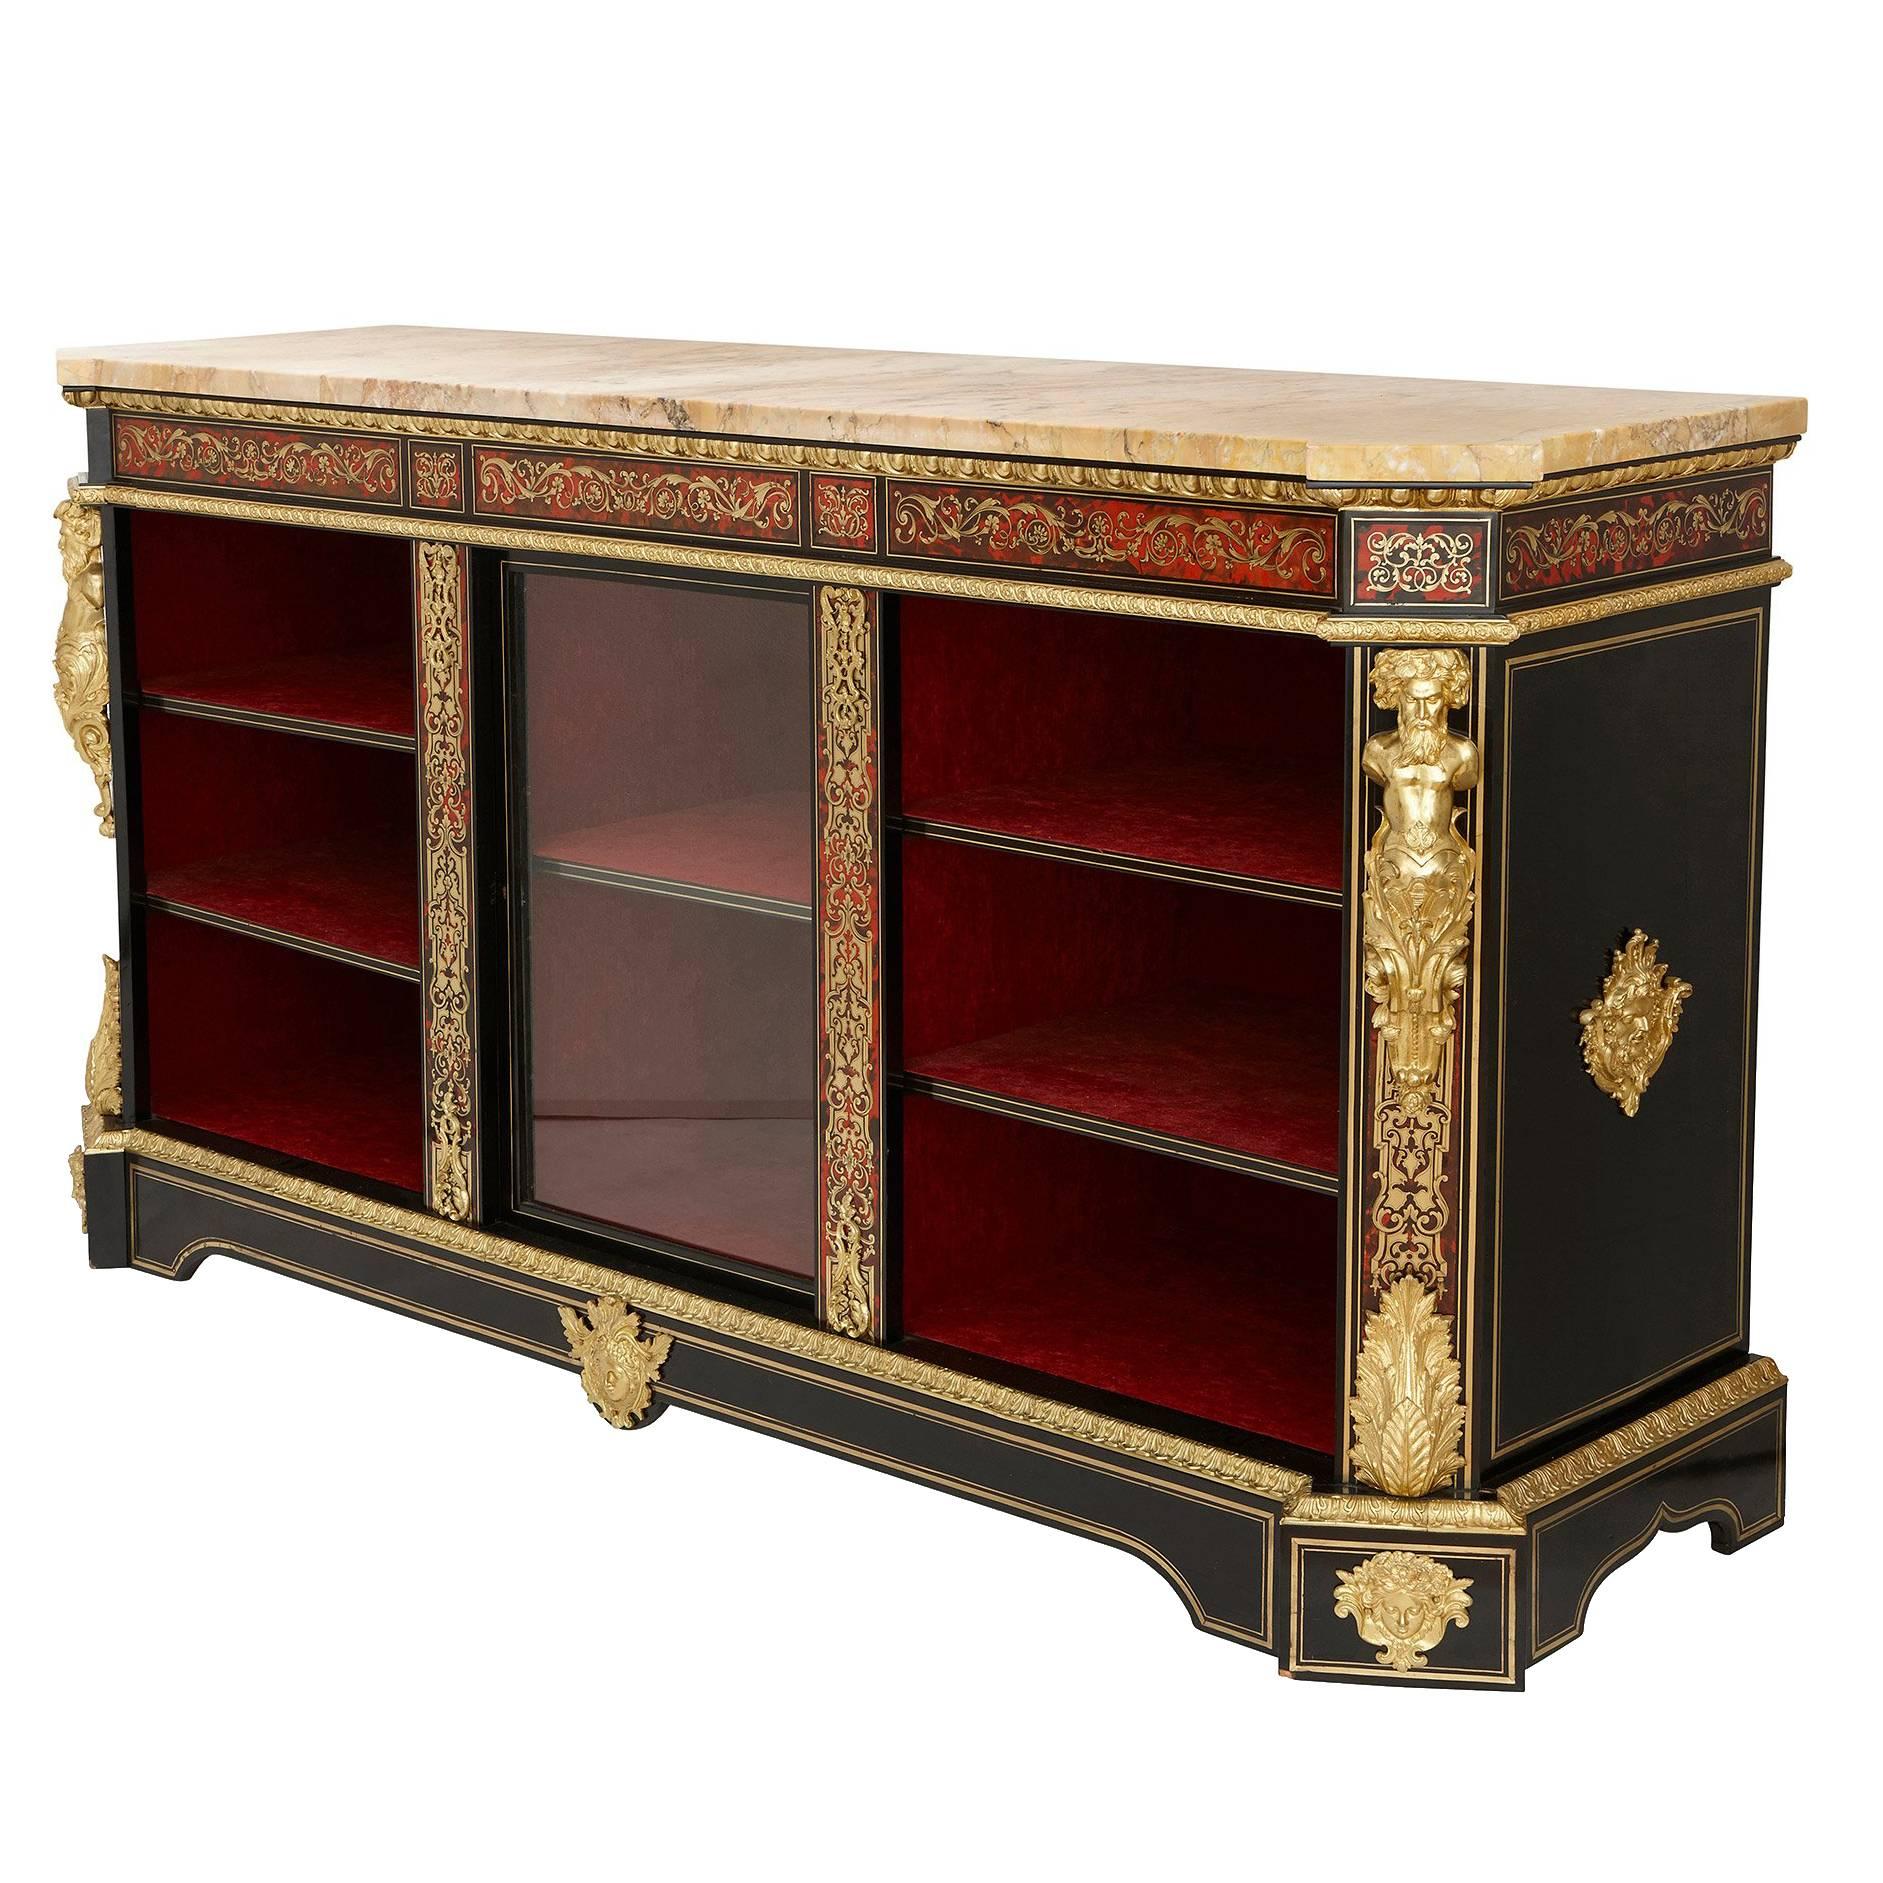 The stunning cabinet in the Napoleon III style and of the sam period, featuring inlaid Boulle work panels of brass and fine scarlet tortoise shell, with cast ormolu mounts depicting mouldings of acanthus leaves and two torsos of a male figure on